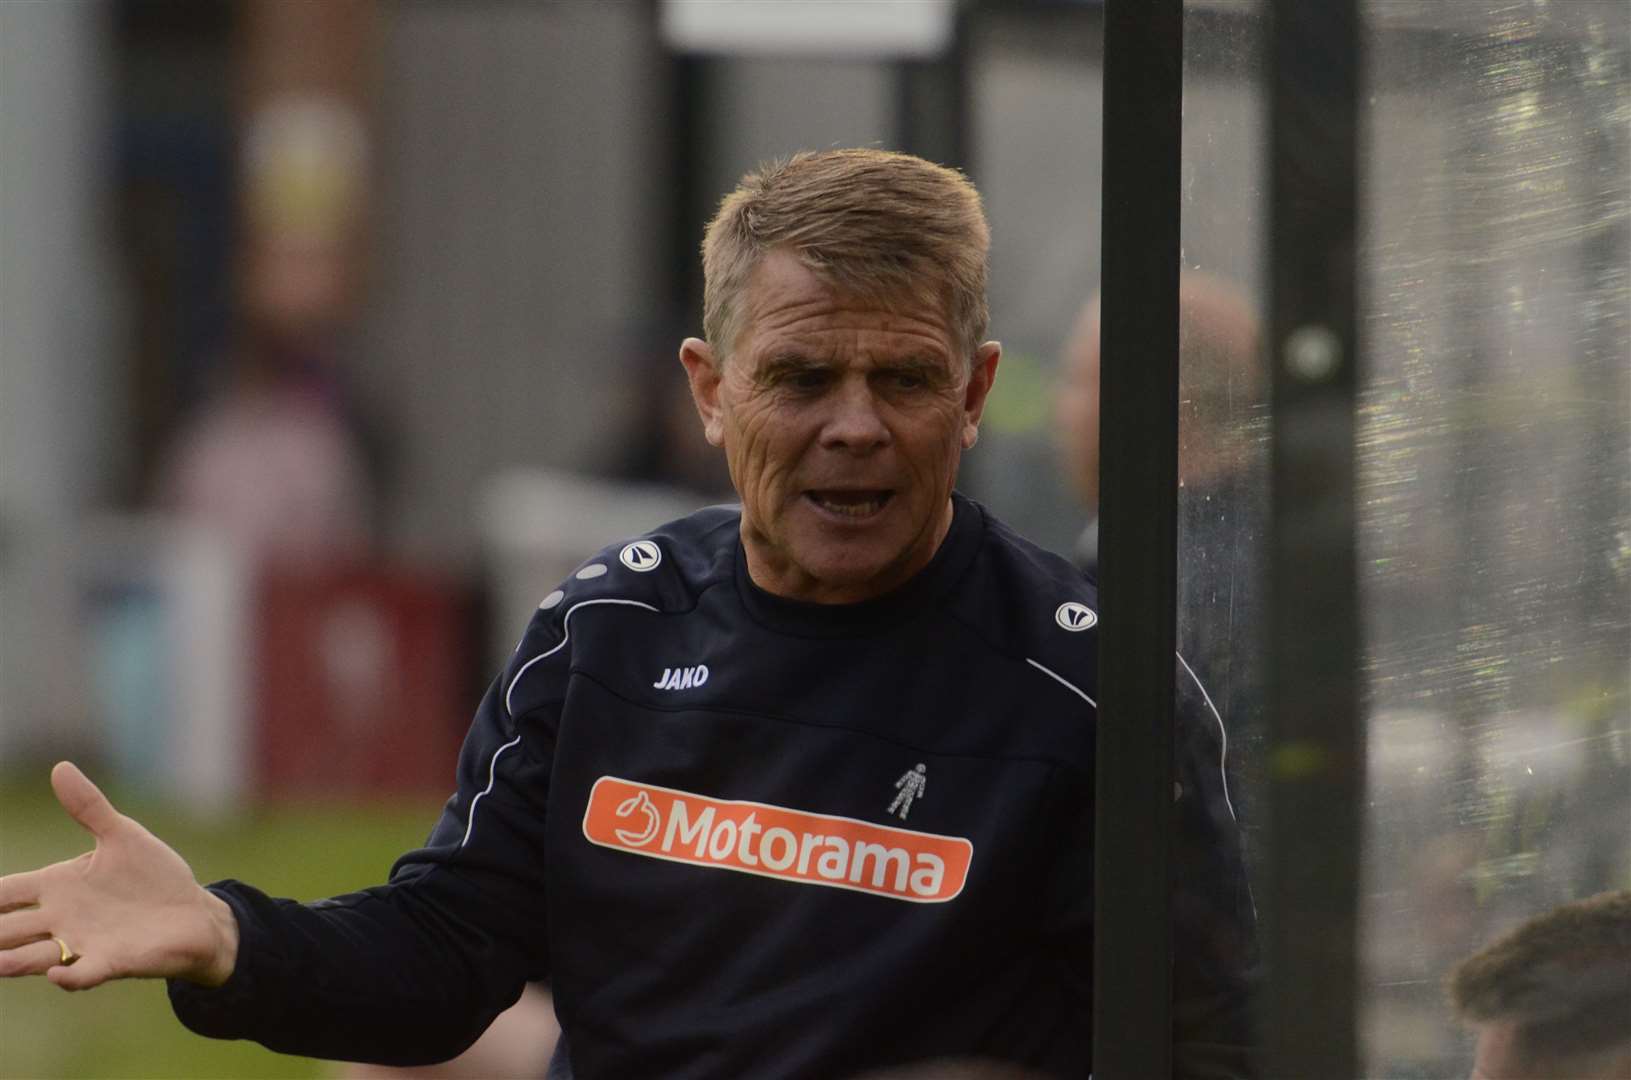 Manager Andy Hessenthaler spoke out about the messages